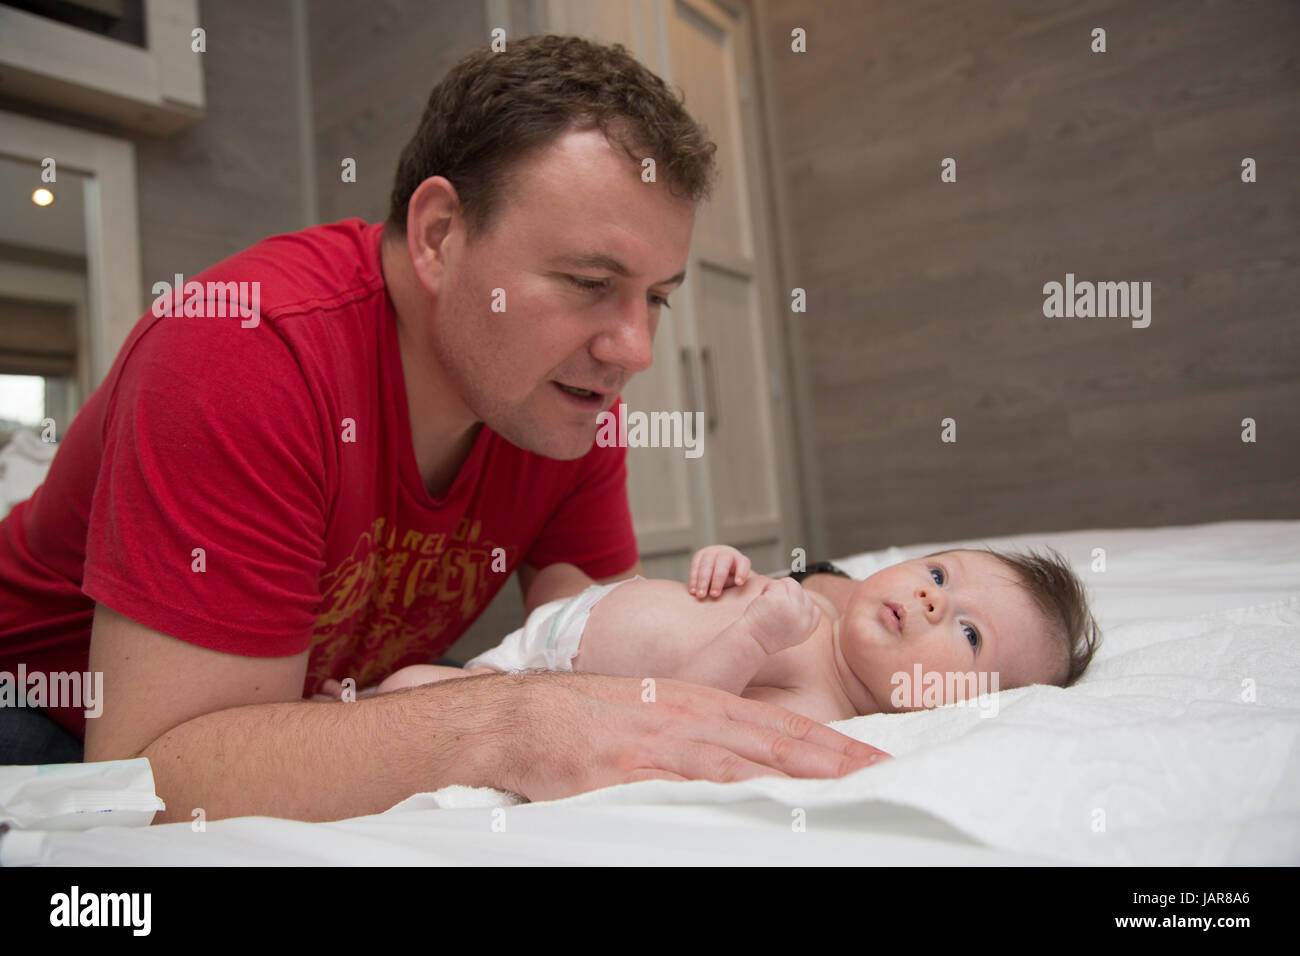 Dad soothing newborn baby Stock Photo